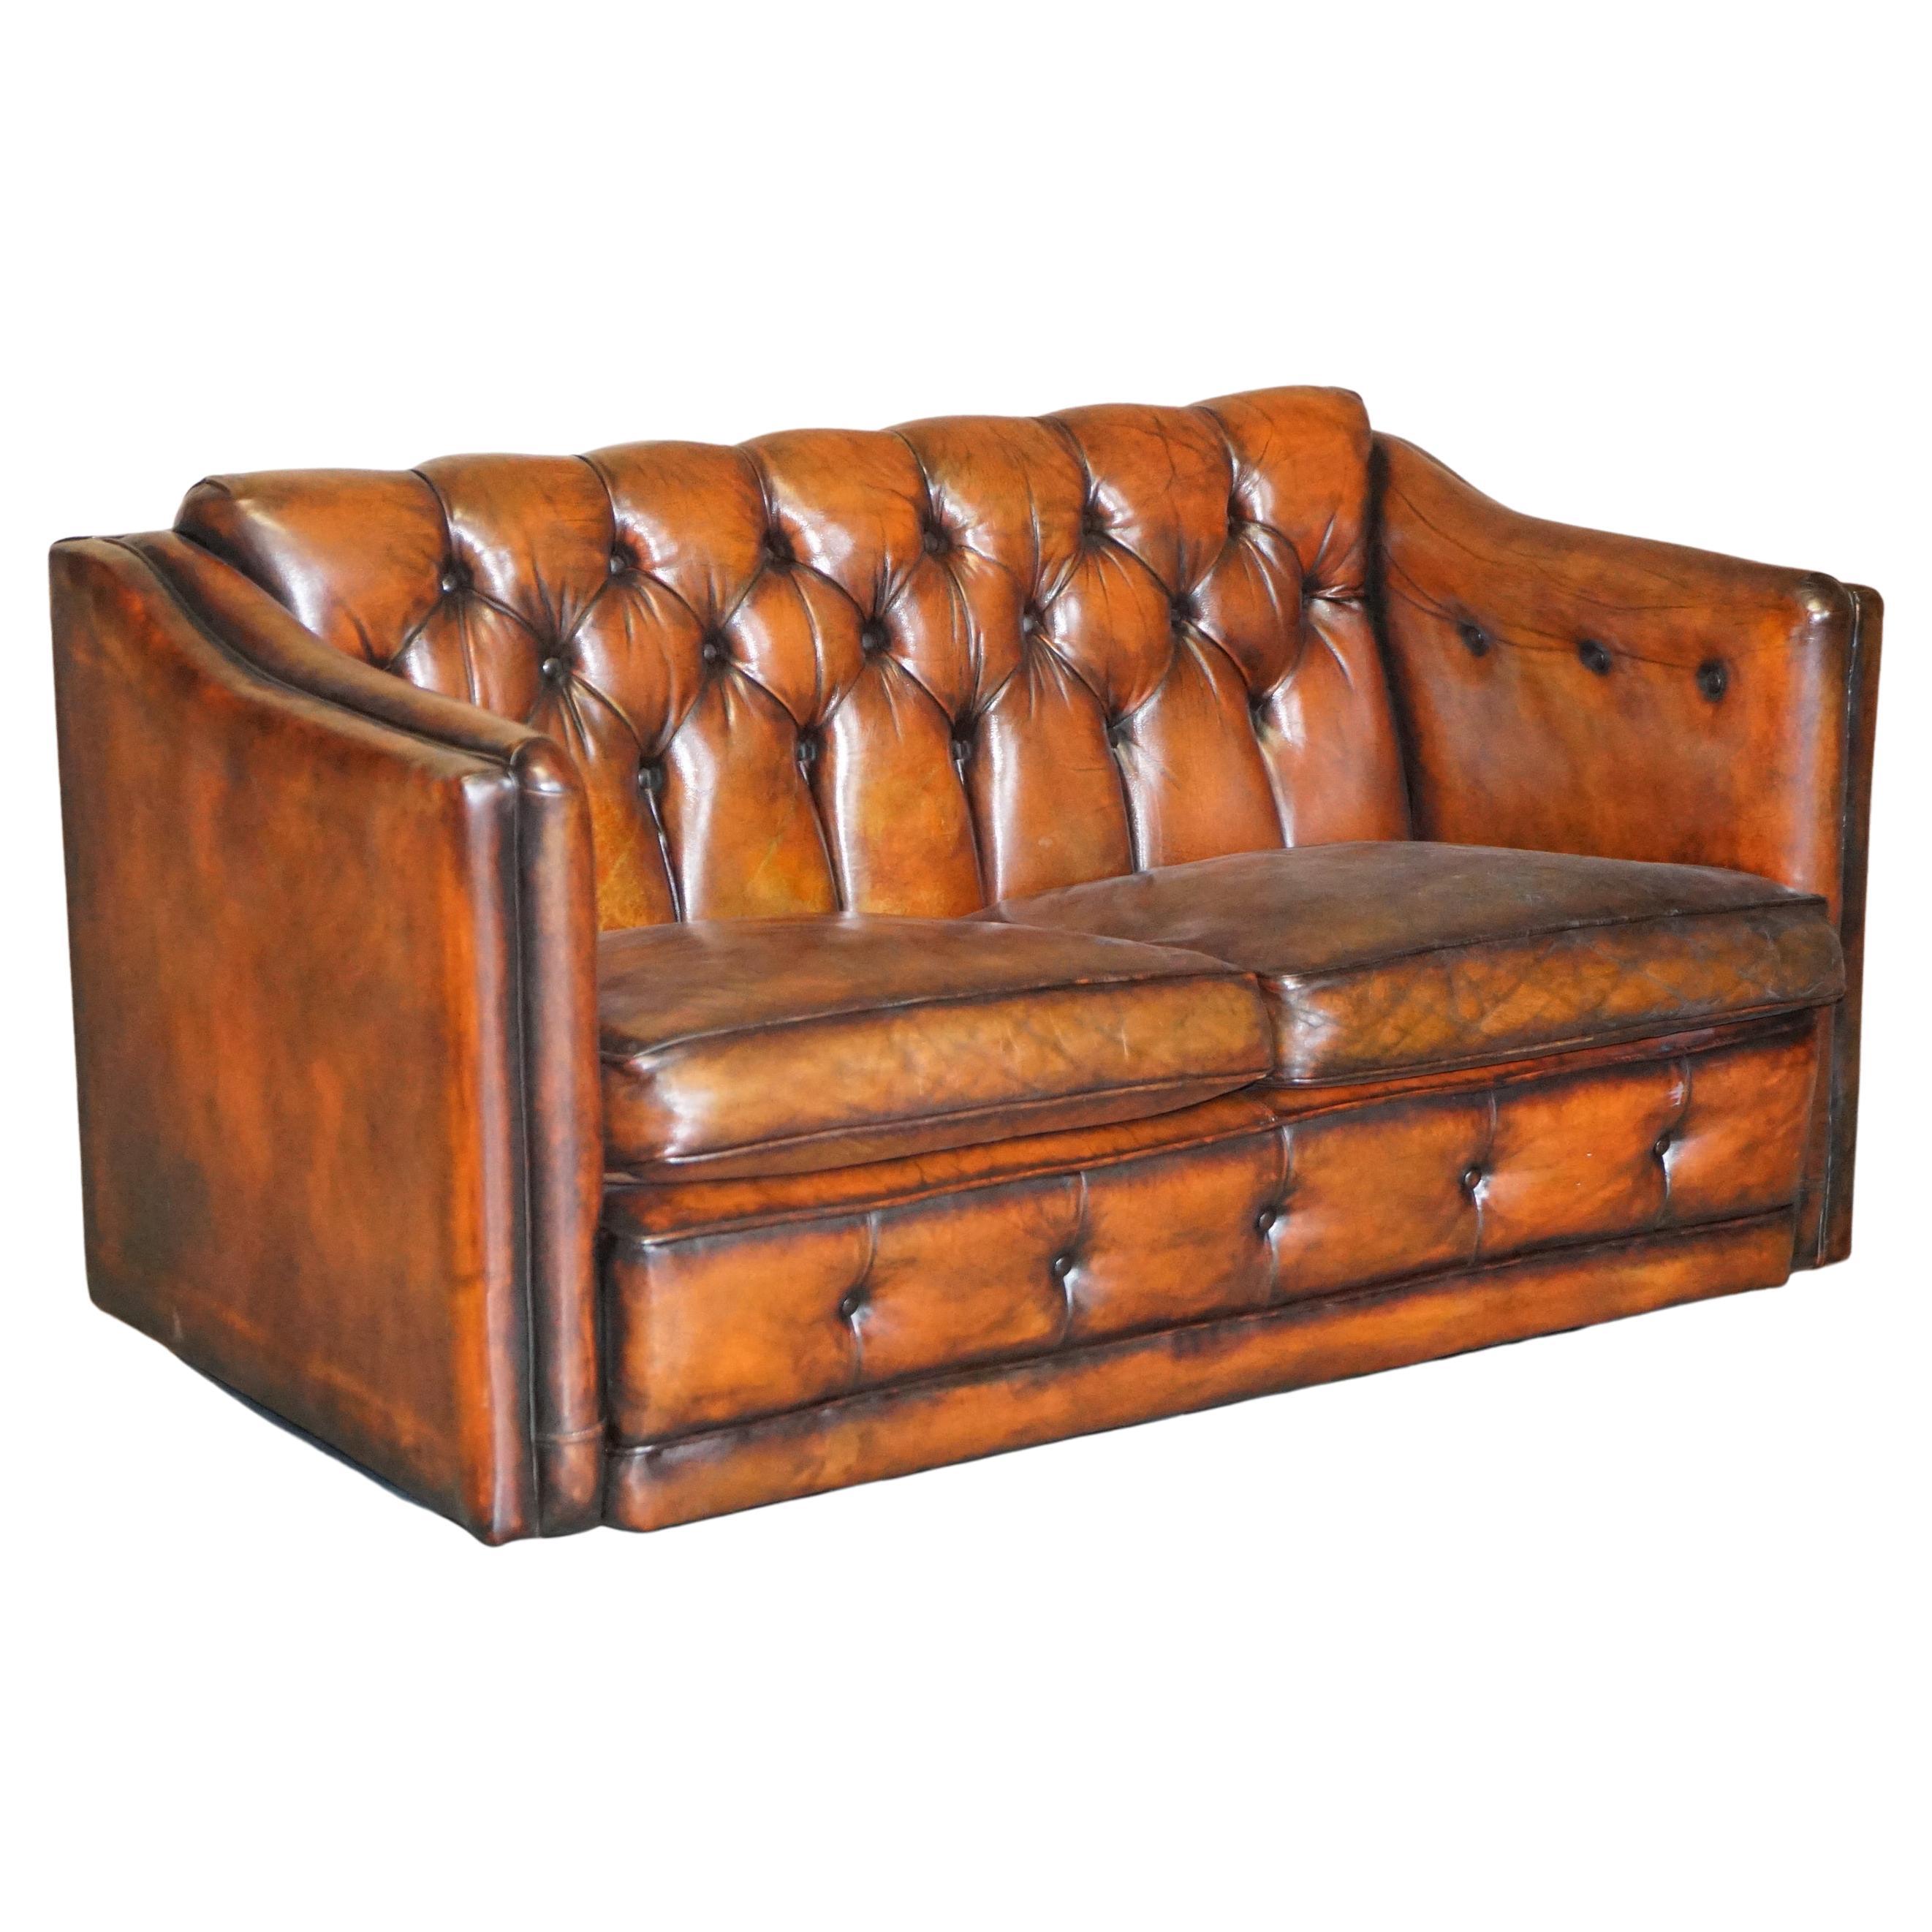 Circa 1920 Art Deco Fully Restored Chesterfield Brown Leather Sofa Part Suite For Sale